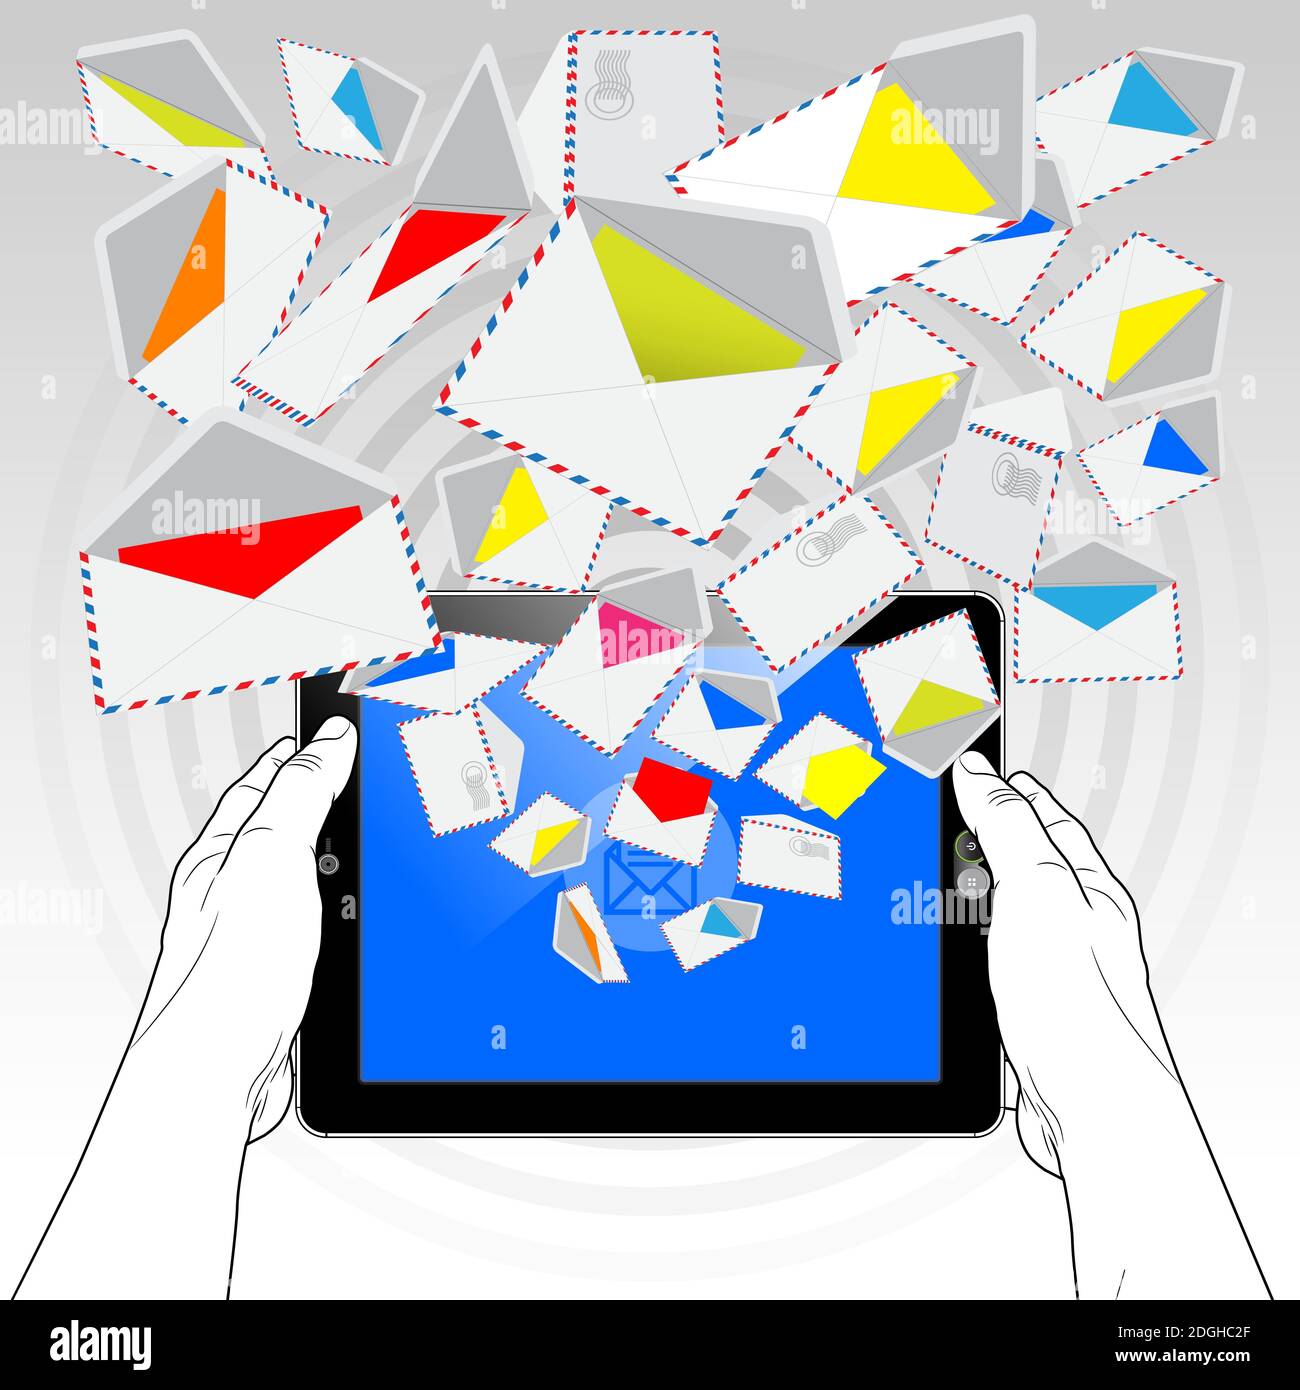 A Tablet Computer sending and receiving email via a high speed 5G mobile connection. A stream of email randomly emitting / streaming from its display. Stock Vector